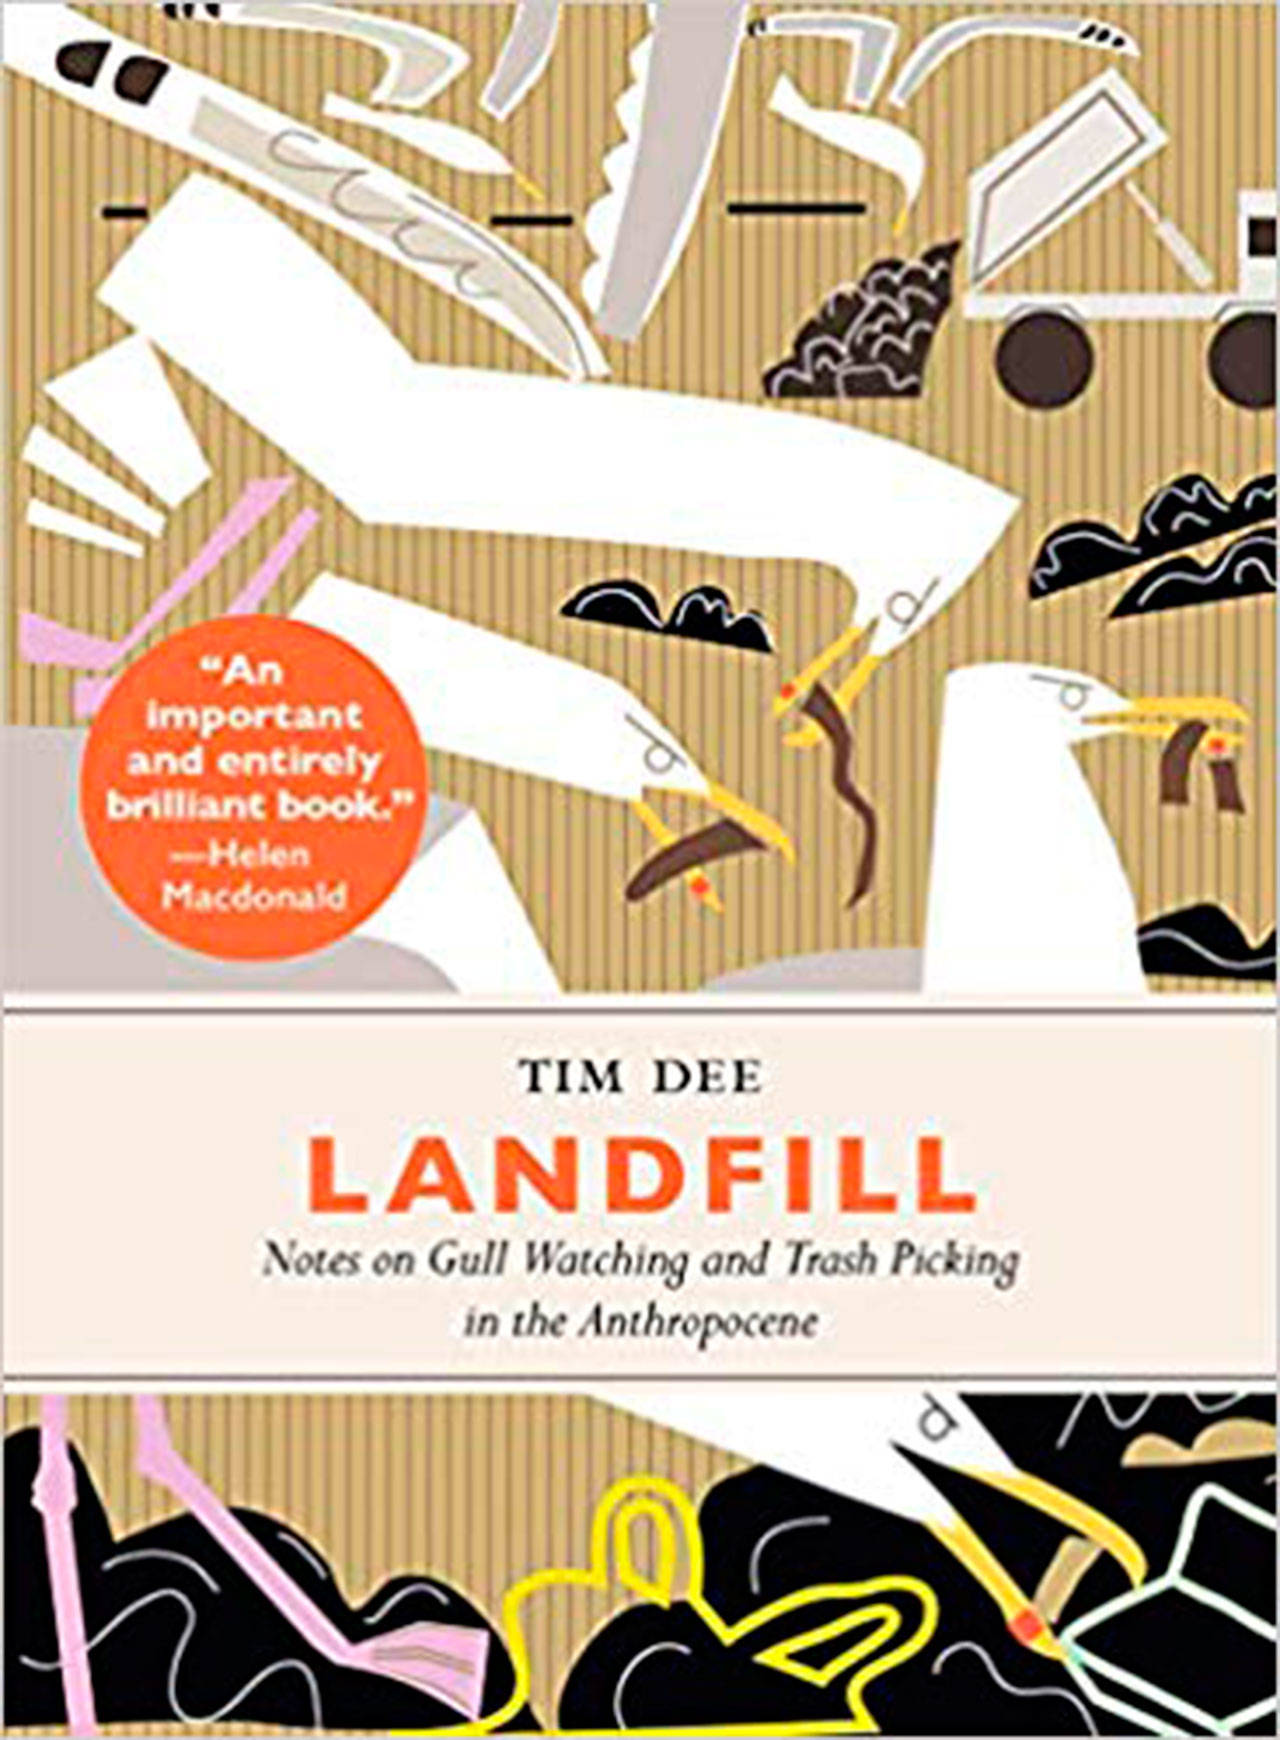 Image courtesy of Eagle Harbor Book Company | British writer and radio producer Tim Dee will come to Eagle Harbor Book Company in downtown Winslow at 6:30 p.m. Wednesday, May 8 to discuss his new book “Landfill: Notes on Gull Watching and Trash Picking in the Anthropocene.”